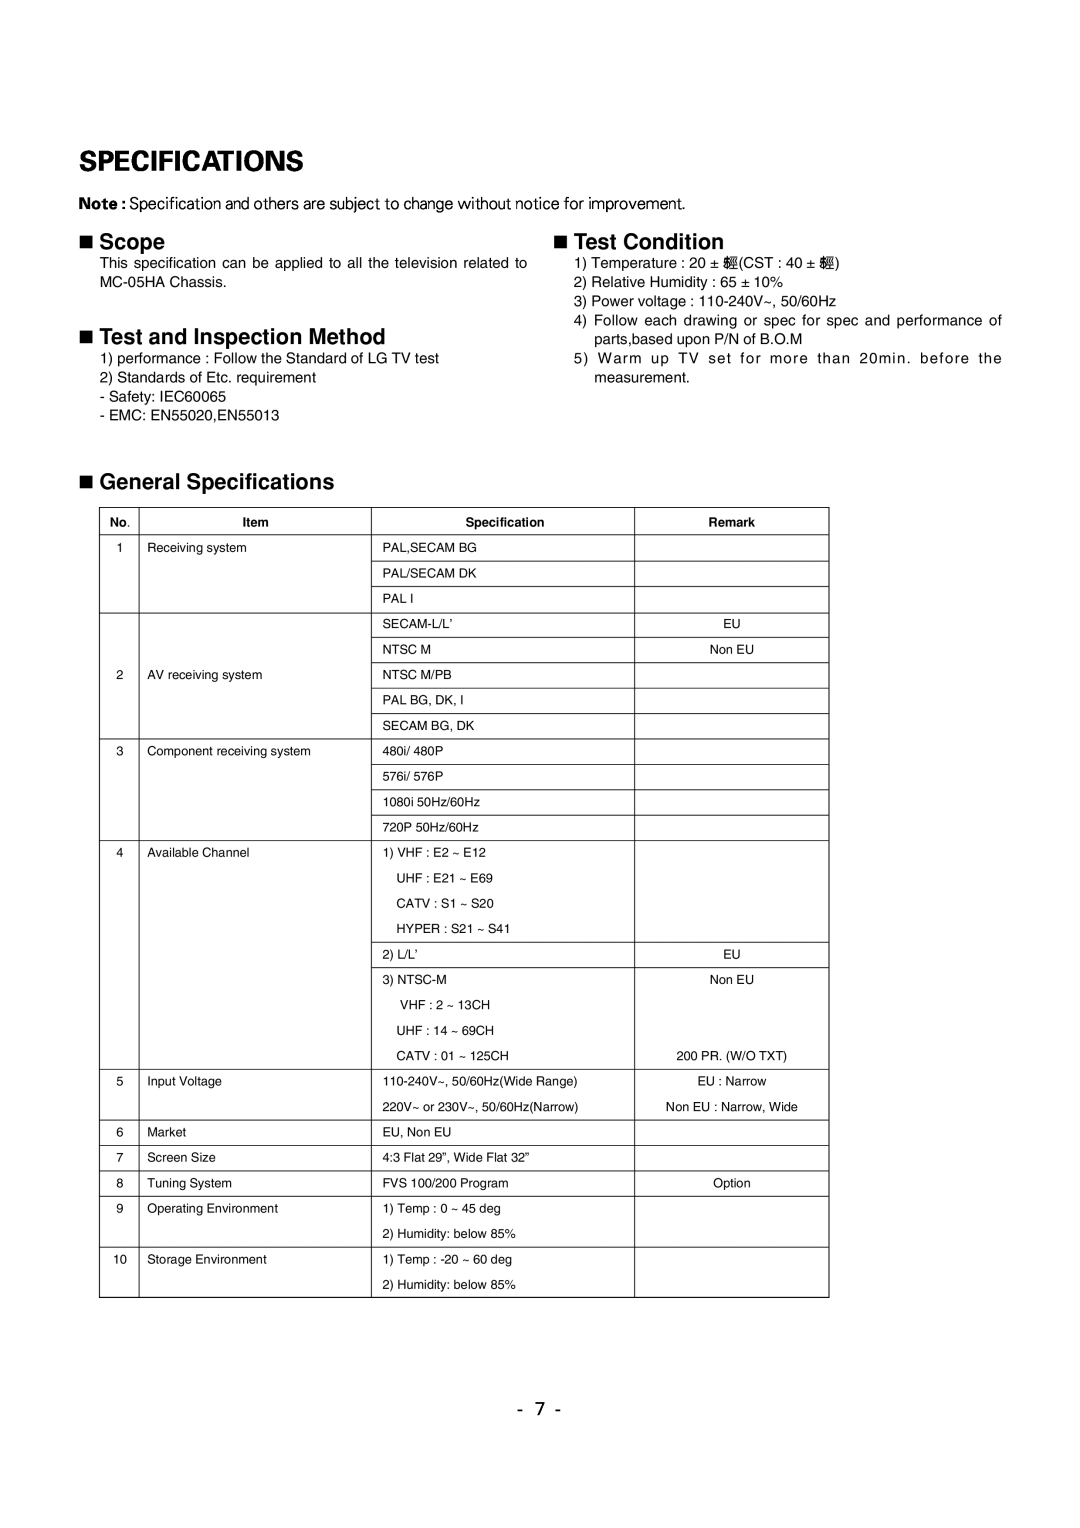 LG Electronics 29FS2AMB/ANX-ZE service manual Specifications, A Scope, A Test and Inspection Method, A Test Condition 